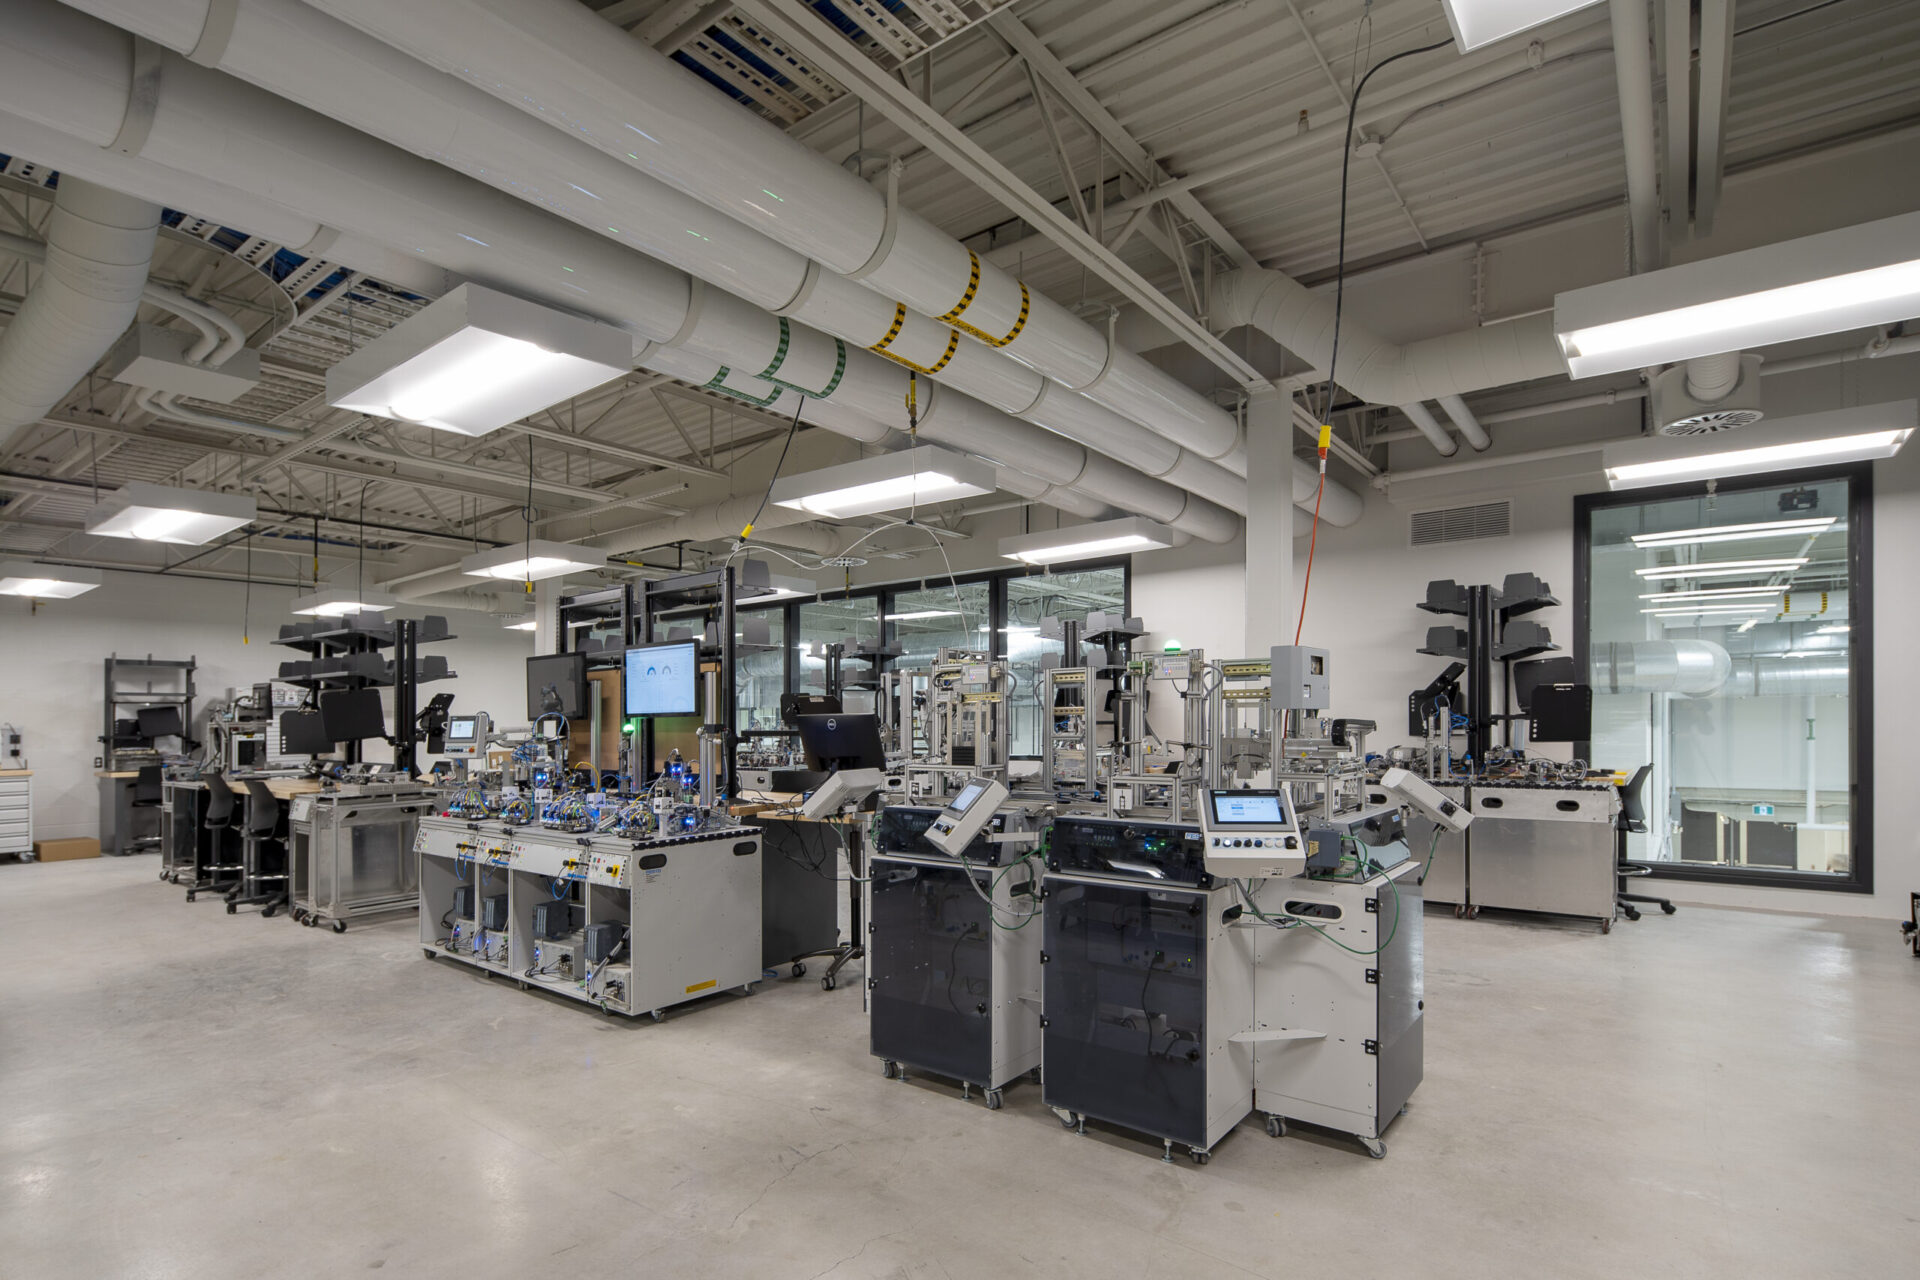 A large engineering laboratory filled with machines and equipment.